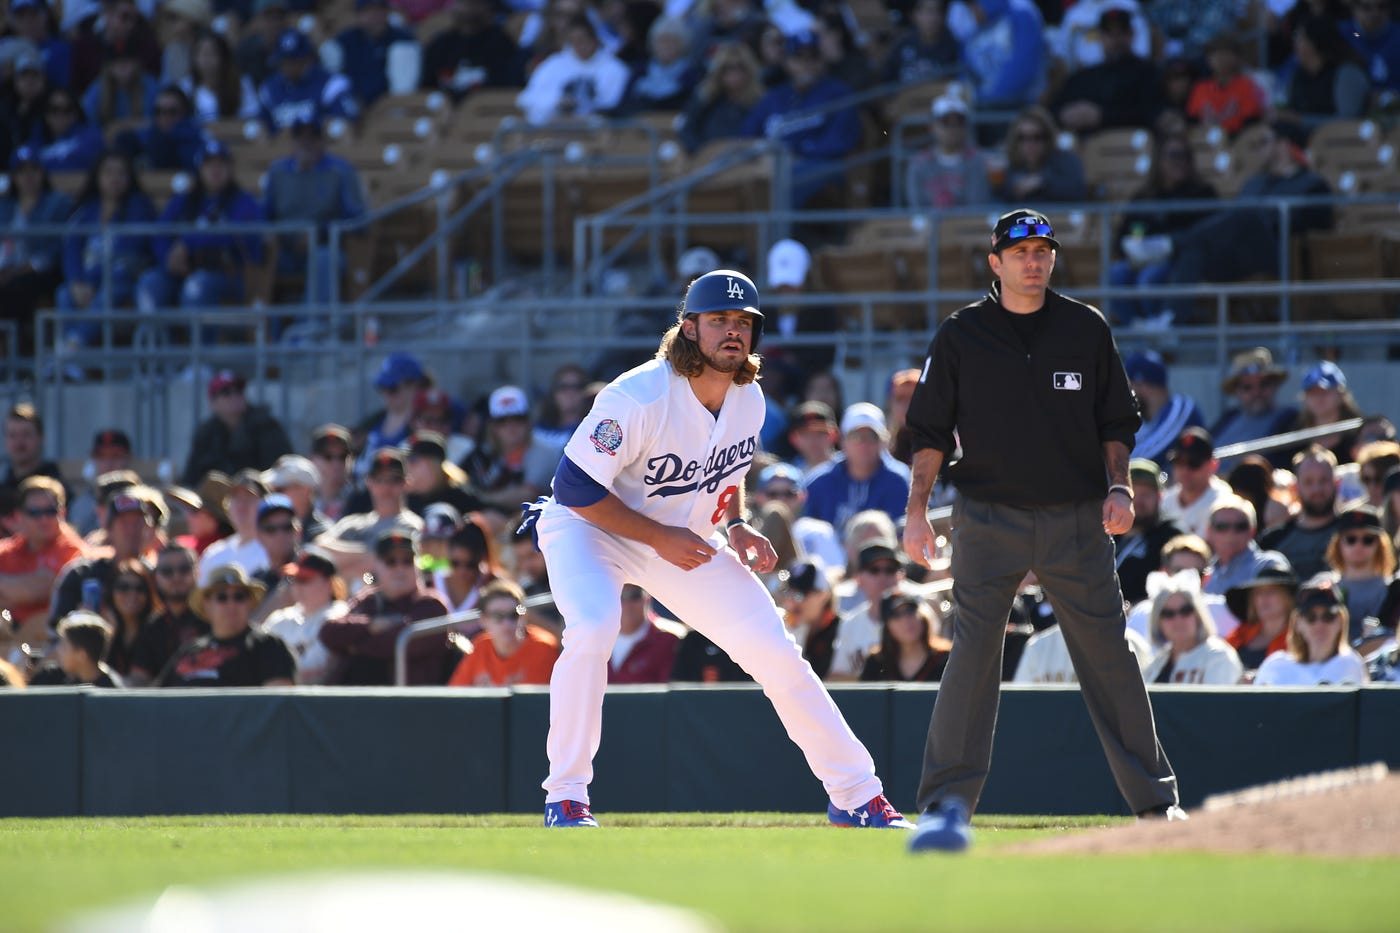 The Dodgers' 2018 Opening Day roster, by Rowan Kavner